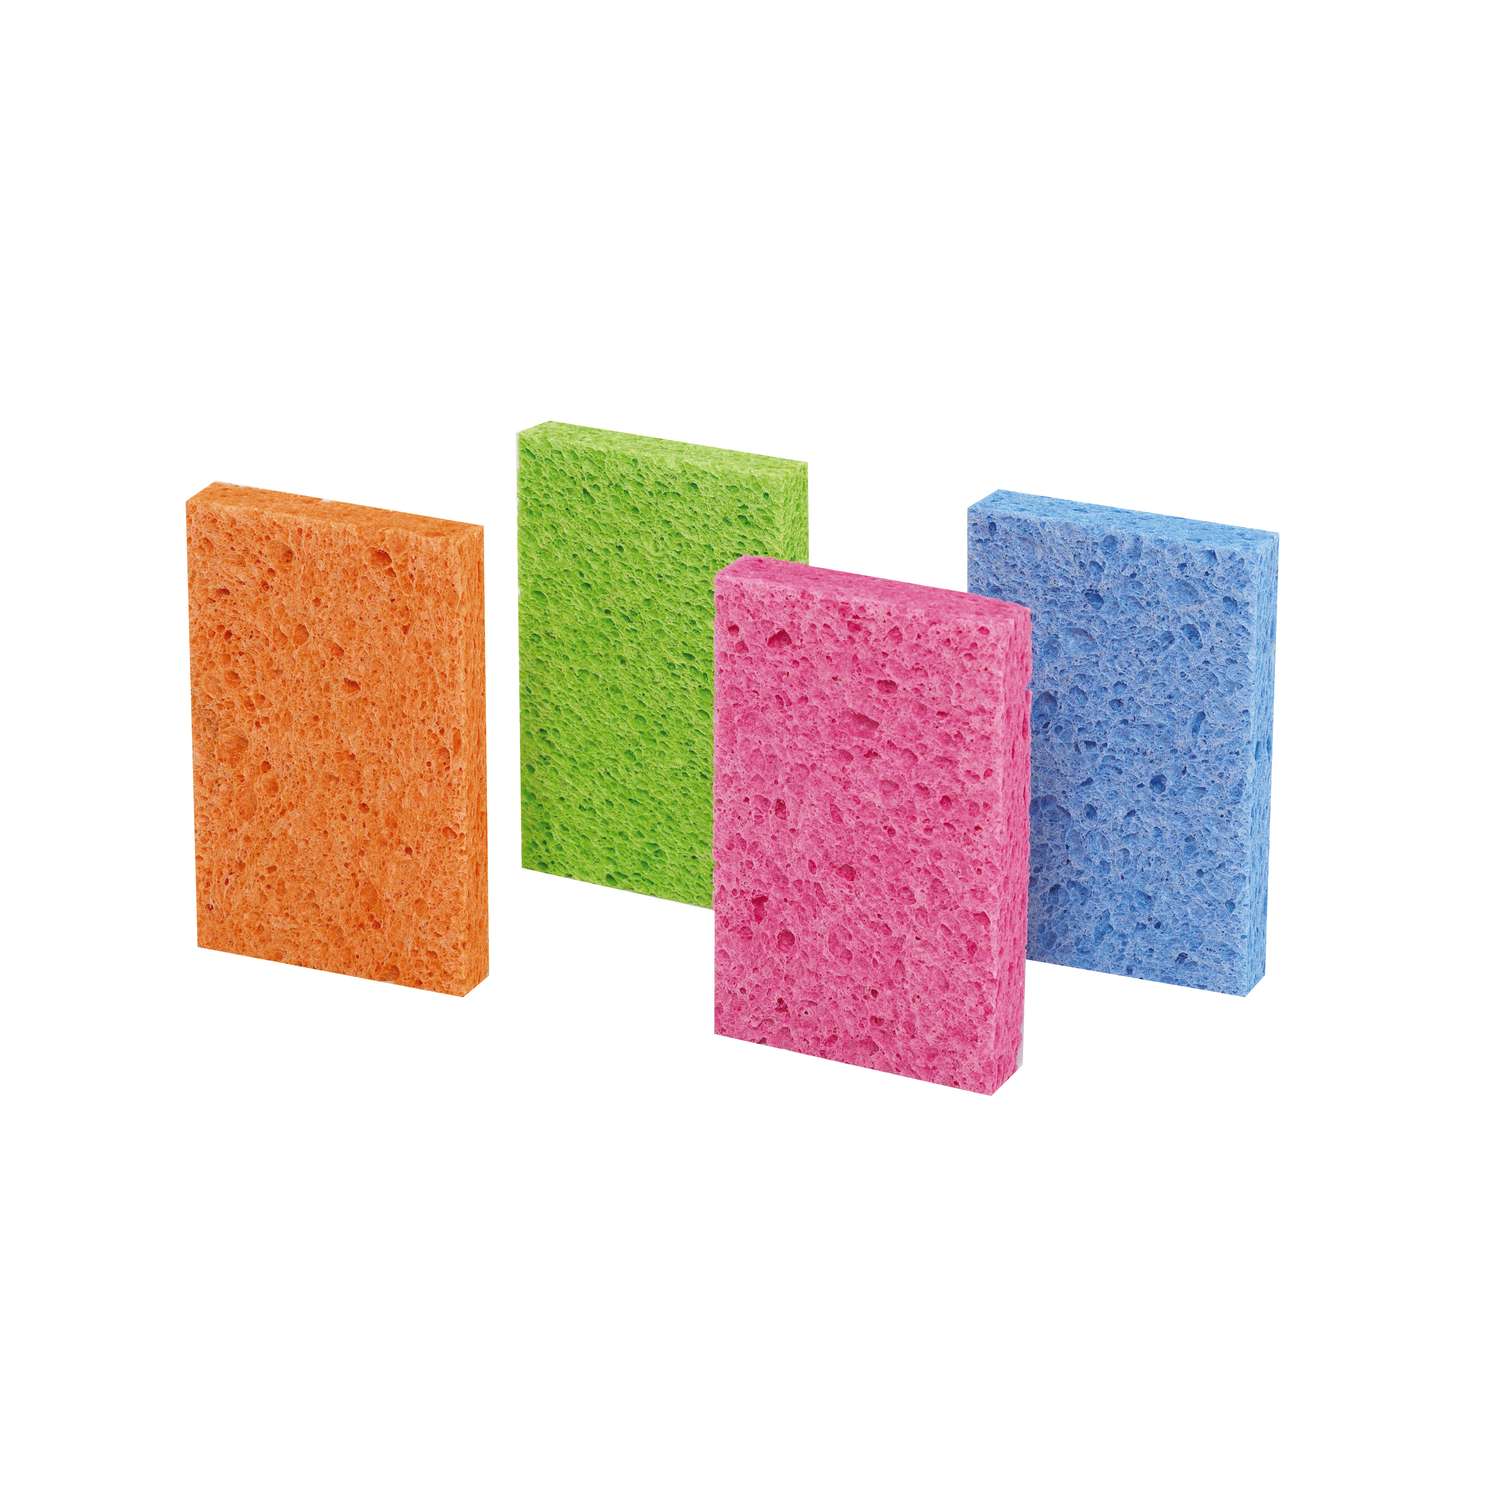 Scotch-Brite Sponge Cloth, 1 pack containing 3 packets with 2 sponge cloths  each, which equals 6 sponges (Color/Pattern May vary)